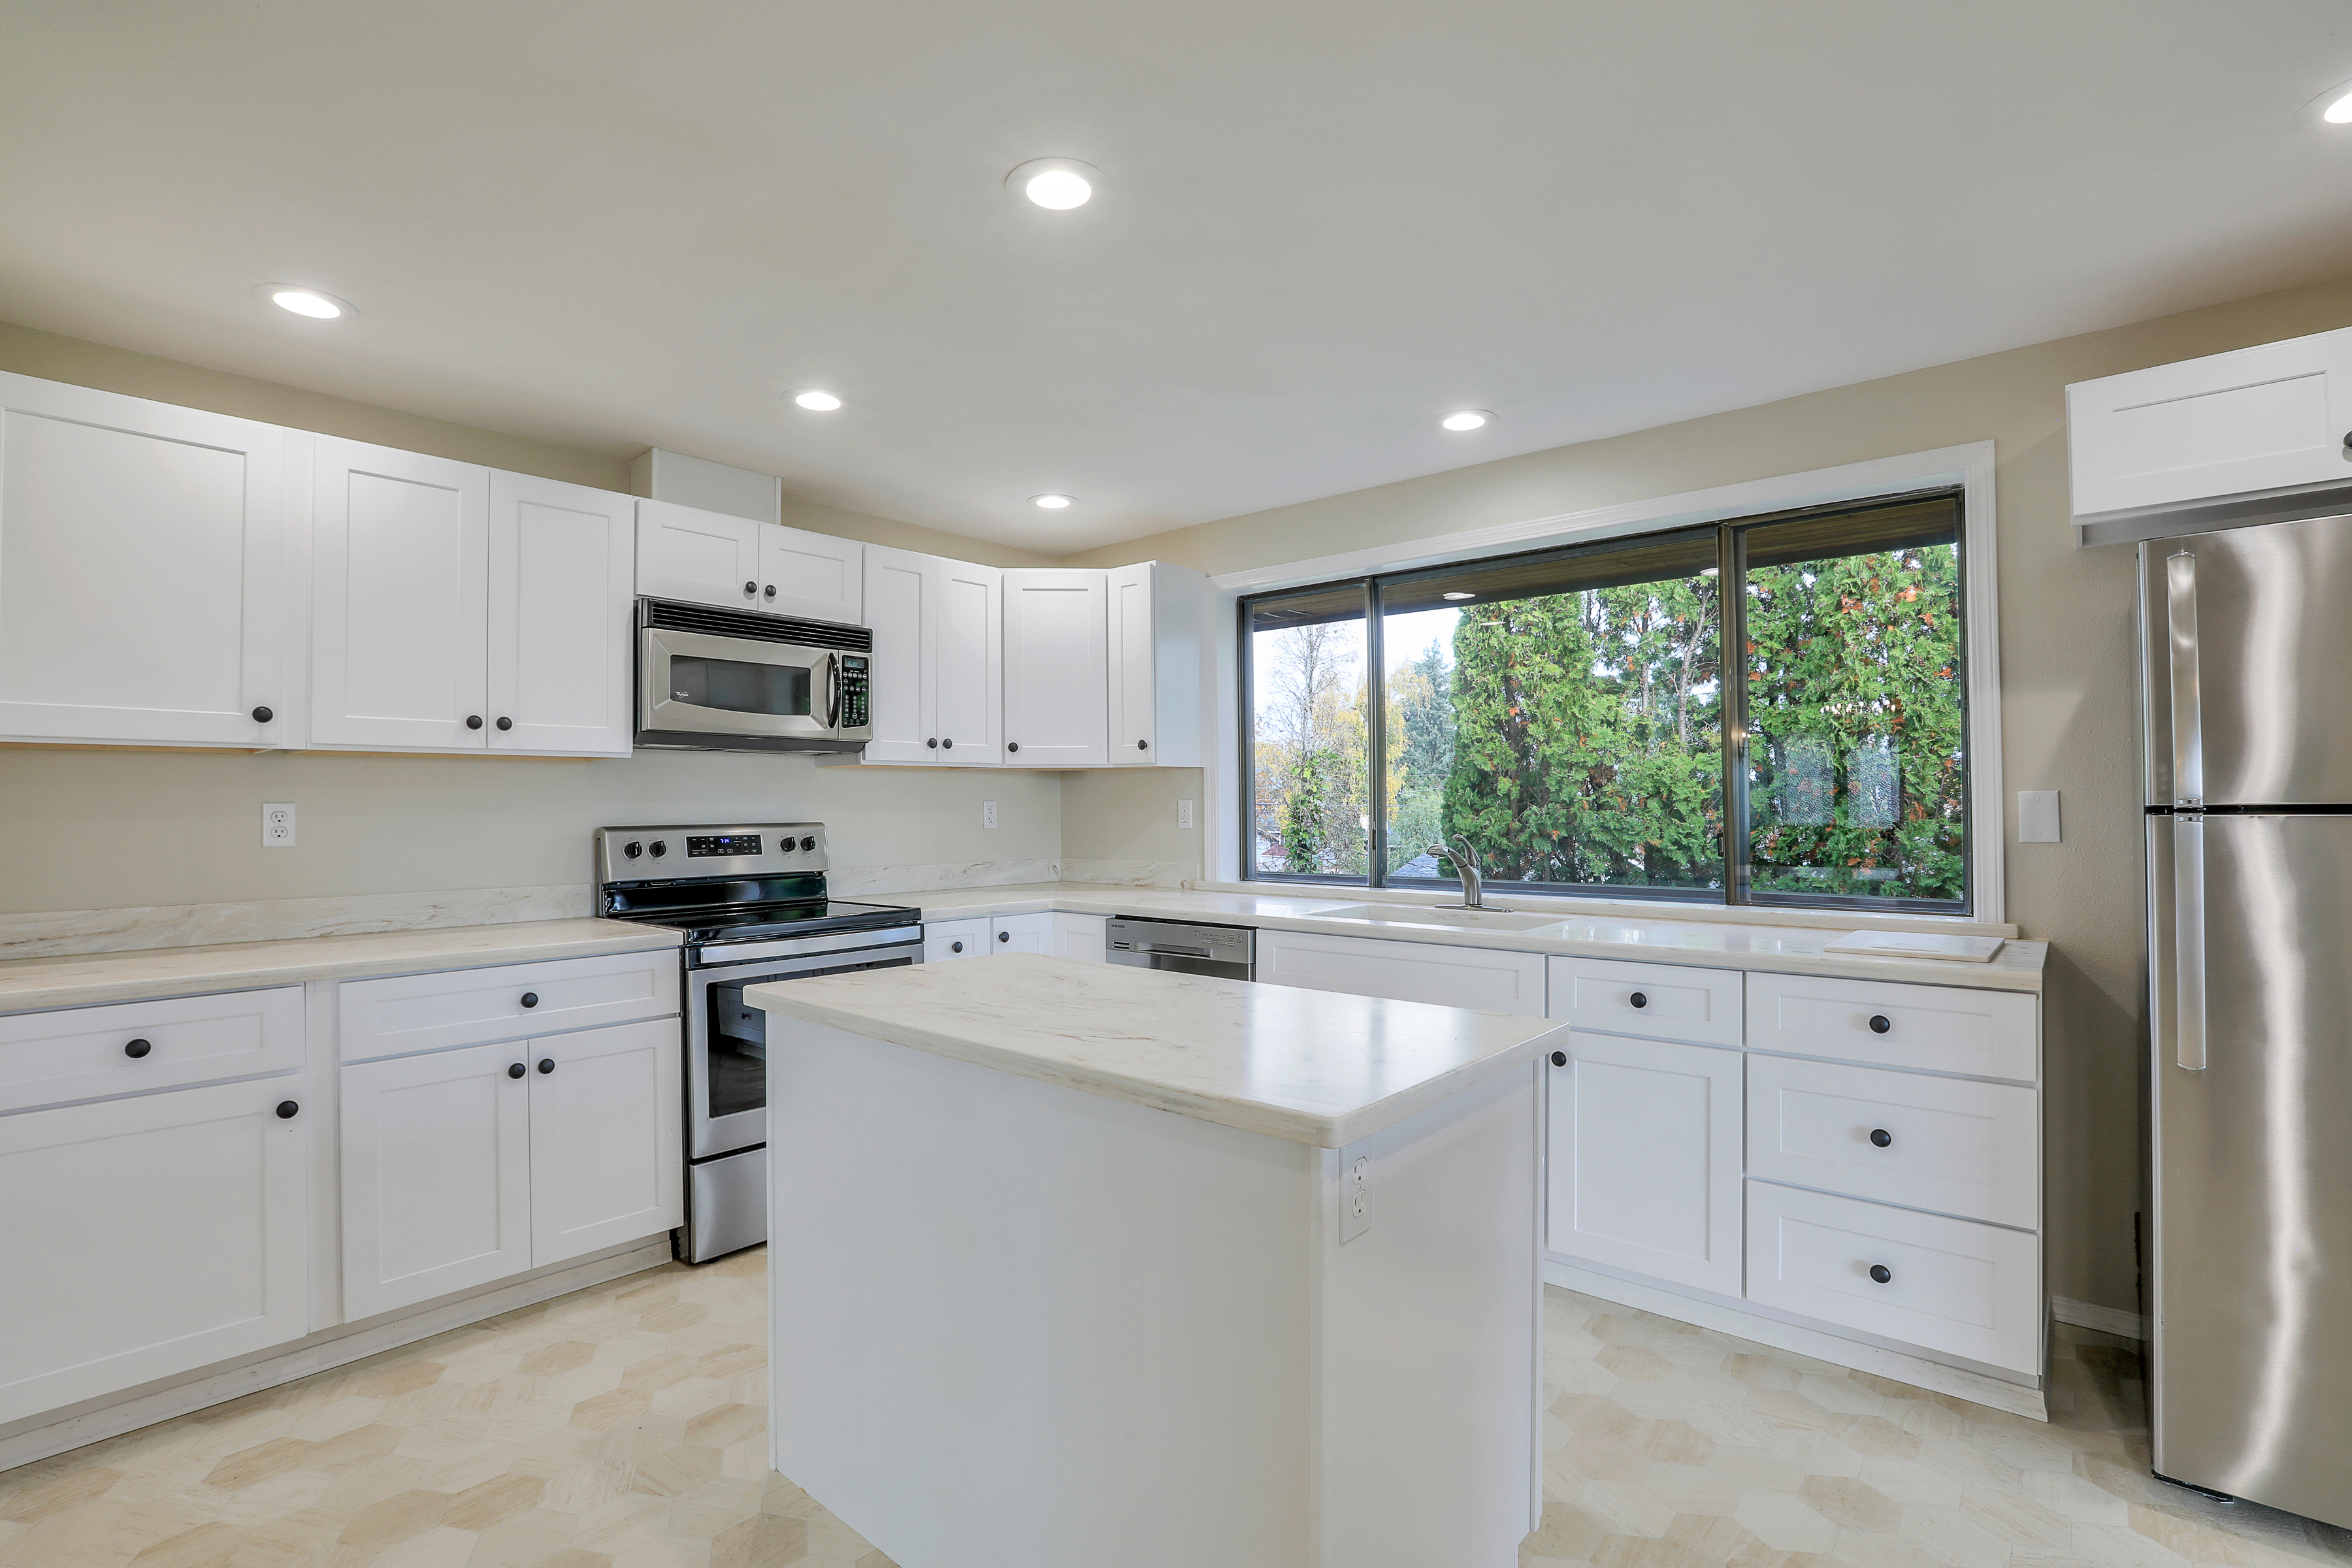 Recently updated kitchen featuring <br>Corian counters and stainless appliances